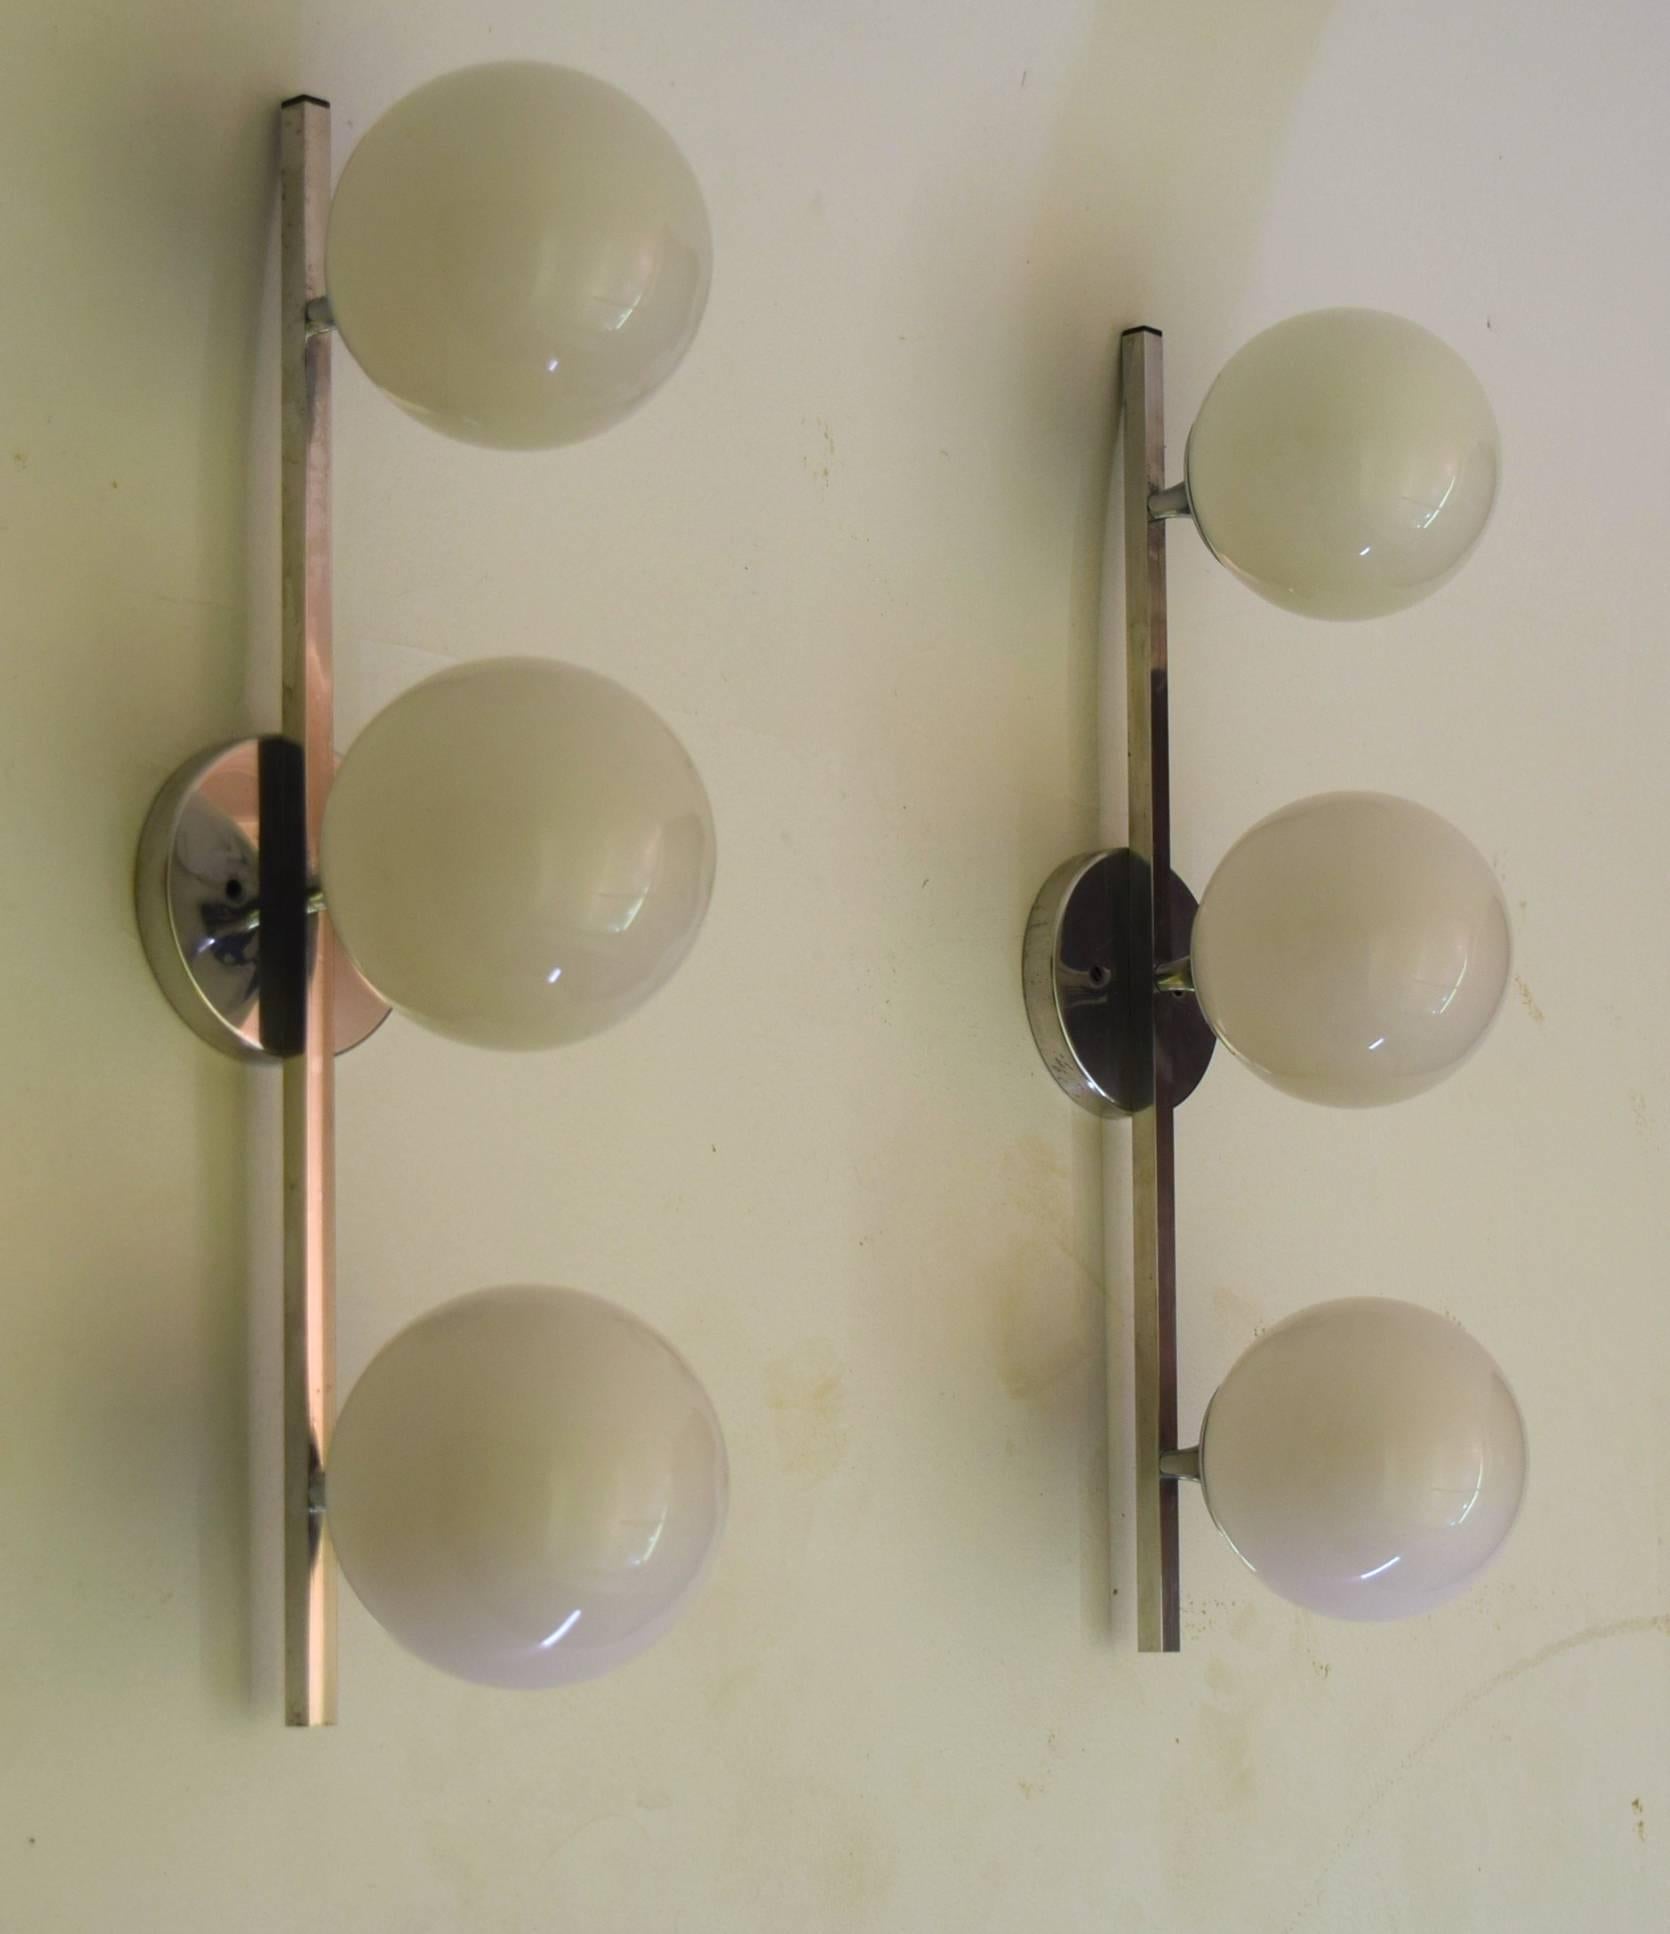 Listing is for both sconces. Each featuring three globes each with 40 watt capacity, these Lightolier sconces feature all original hardware inclusive of ceiling / mounting plates signed by the manufacturer, and as a set ideal for use with vanities